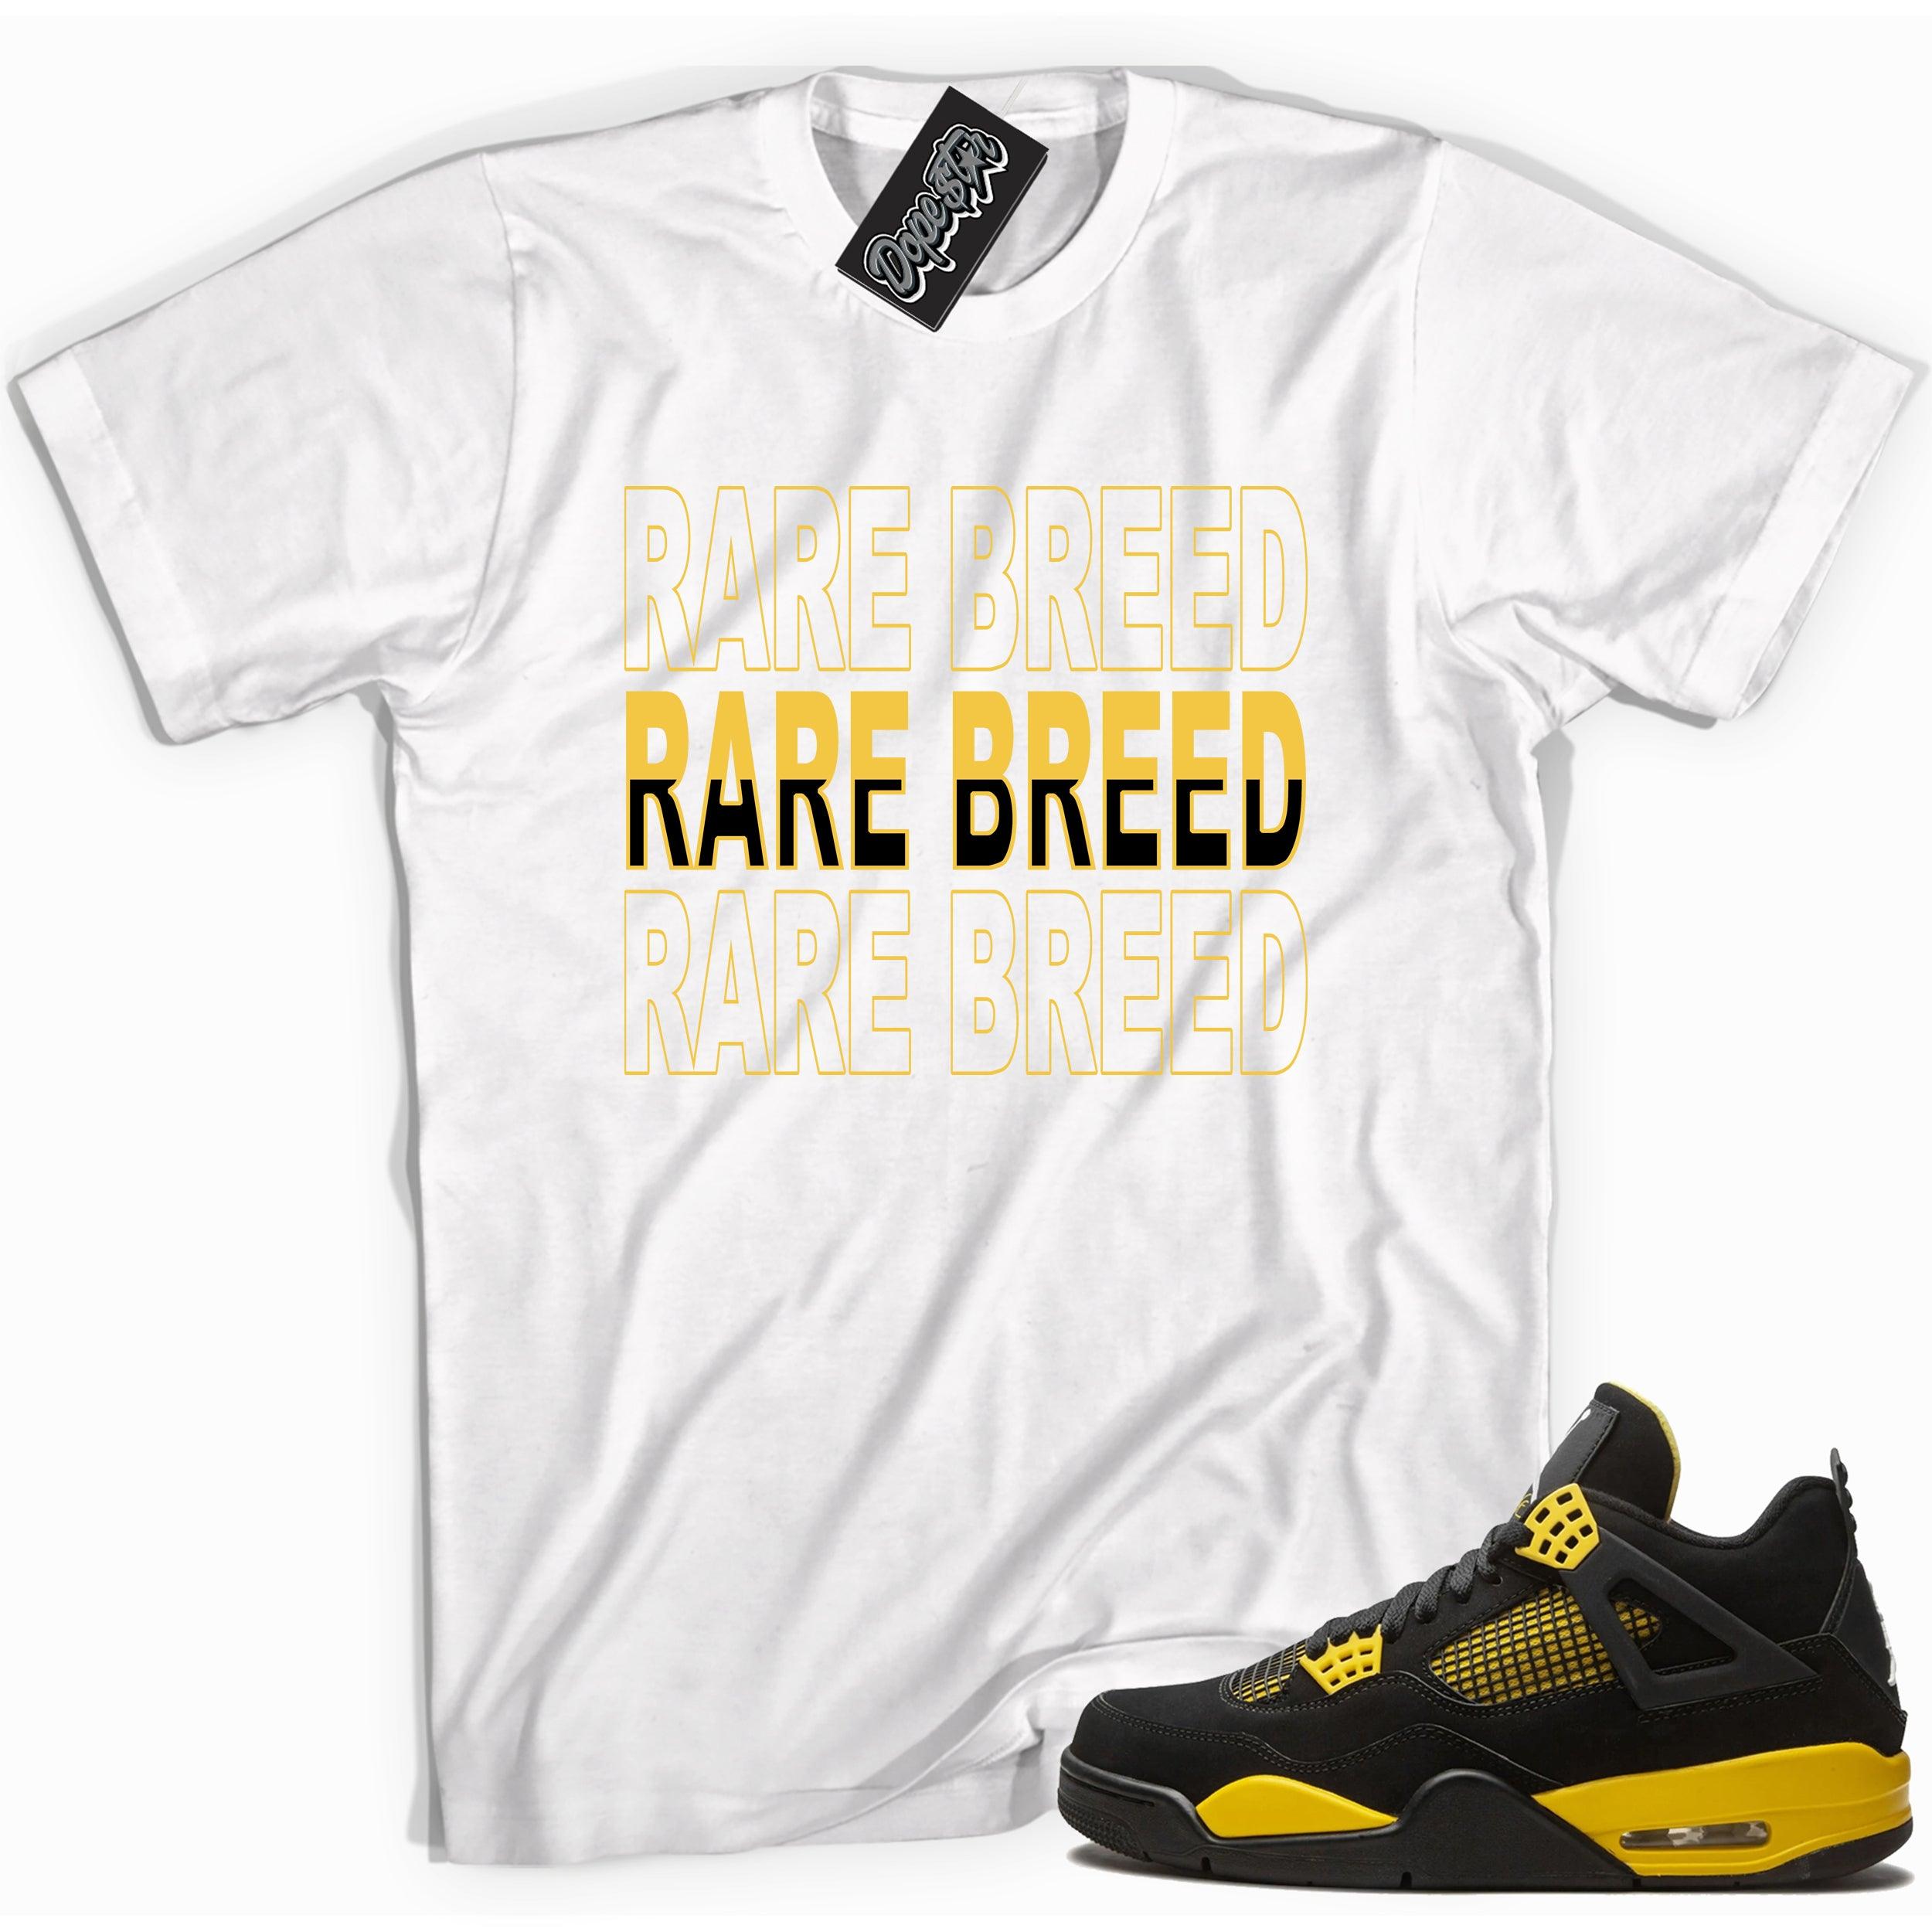 Cool white  graphic tee with 'rare breed' print, that perfectly matches Air Jordan 4 Thunder sneakers